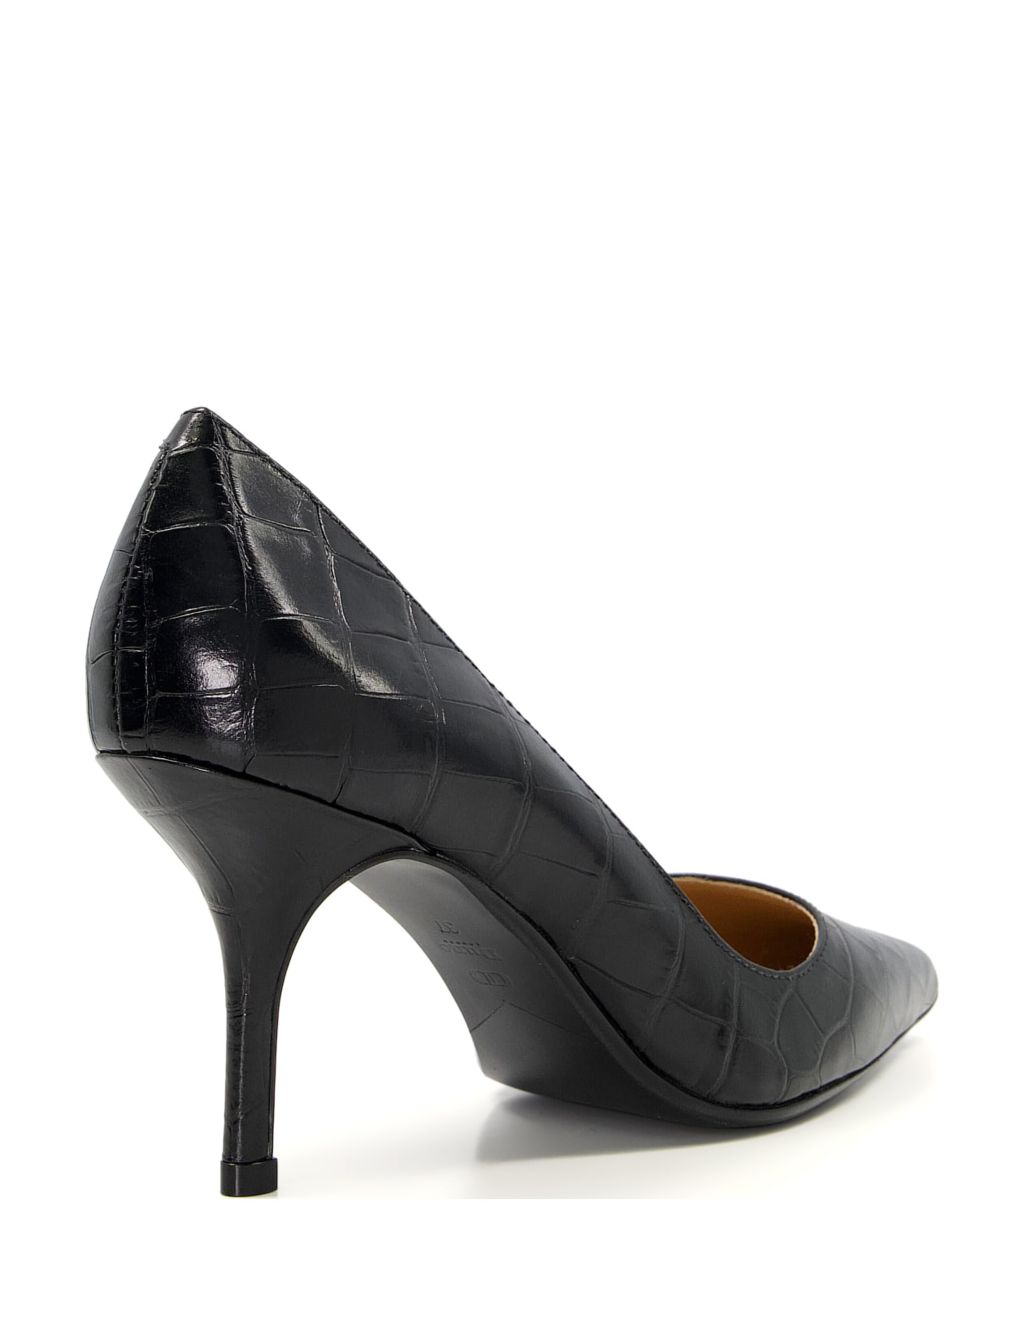 Leather Croc Stiletto Pointed Court Shoes | Dune London | M&S